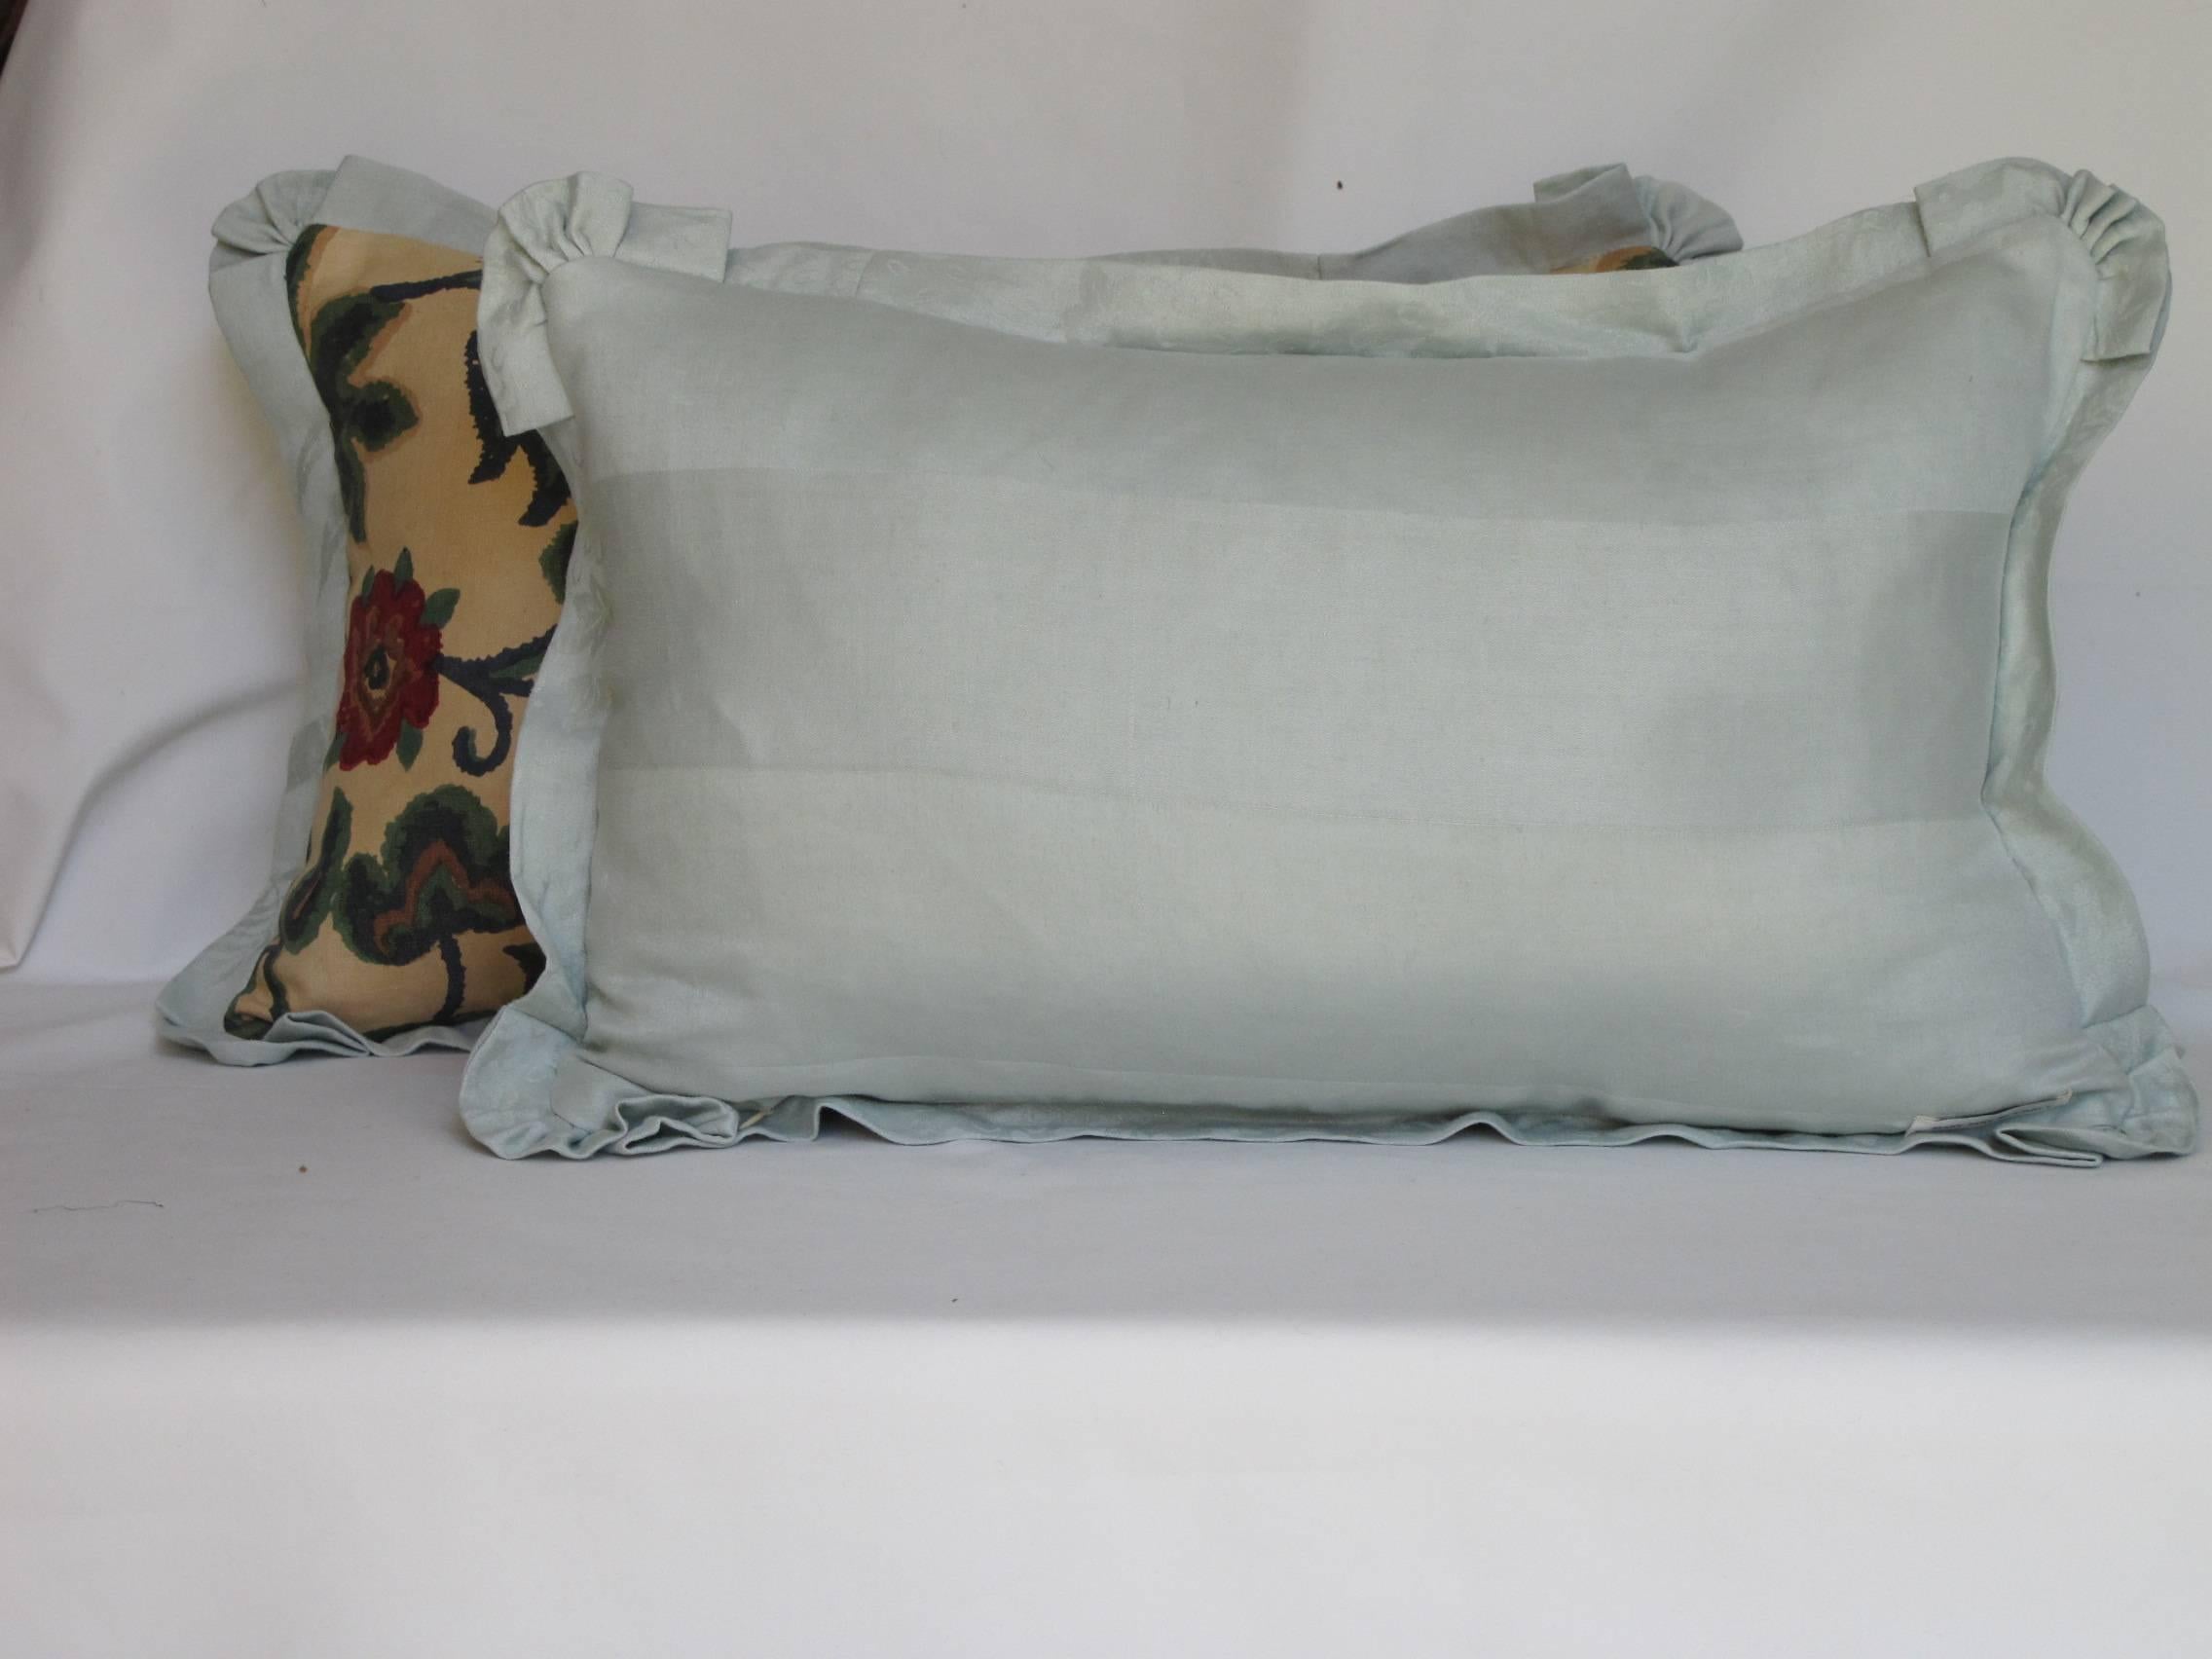 A pair of pillows made from a circa 1920s printed linen with an indienne floral motif, in shades of blue, green and cream, edged and backed with hand-dyed linen damask. Hidden zipper closure, down inserts included.
 